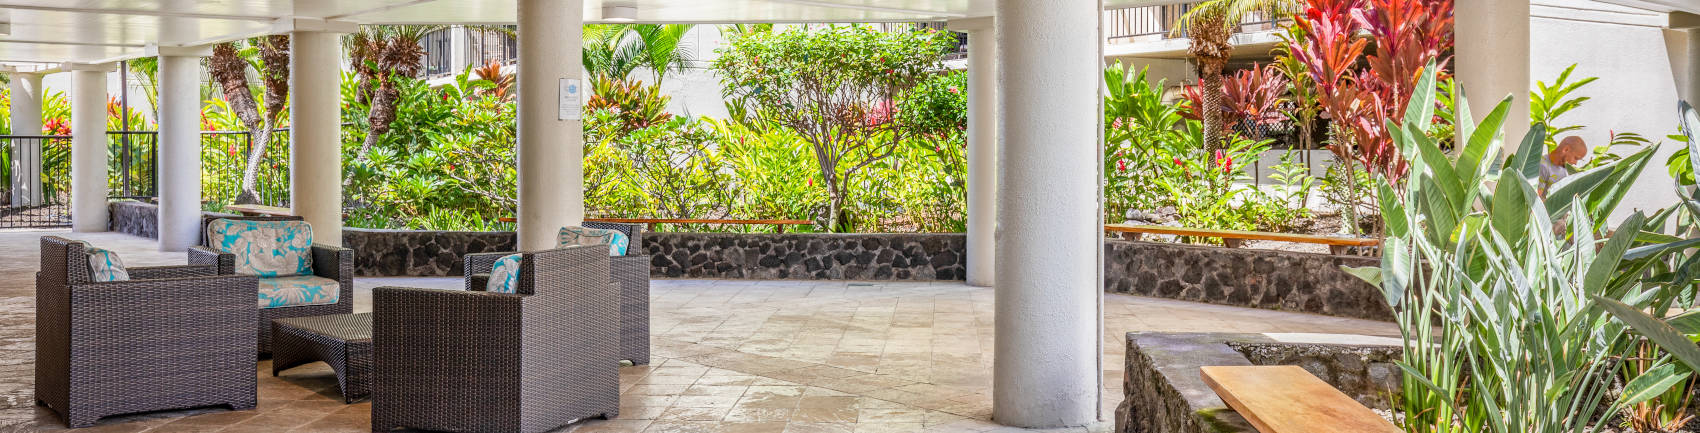 Spacious and open air lobby walkway with a sitting area and tropical plants 